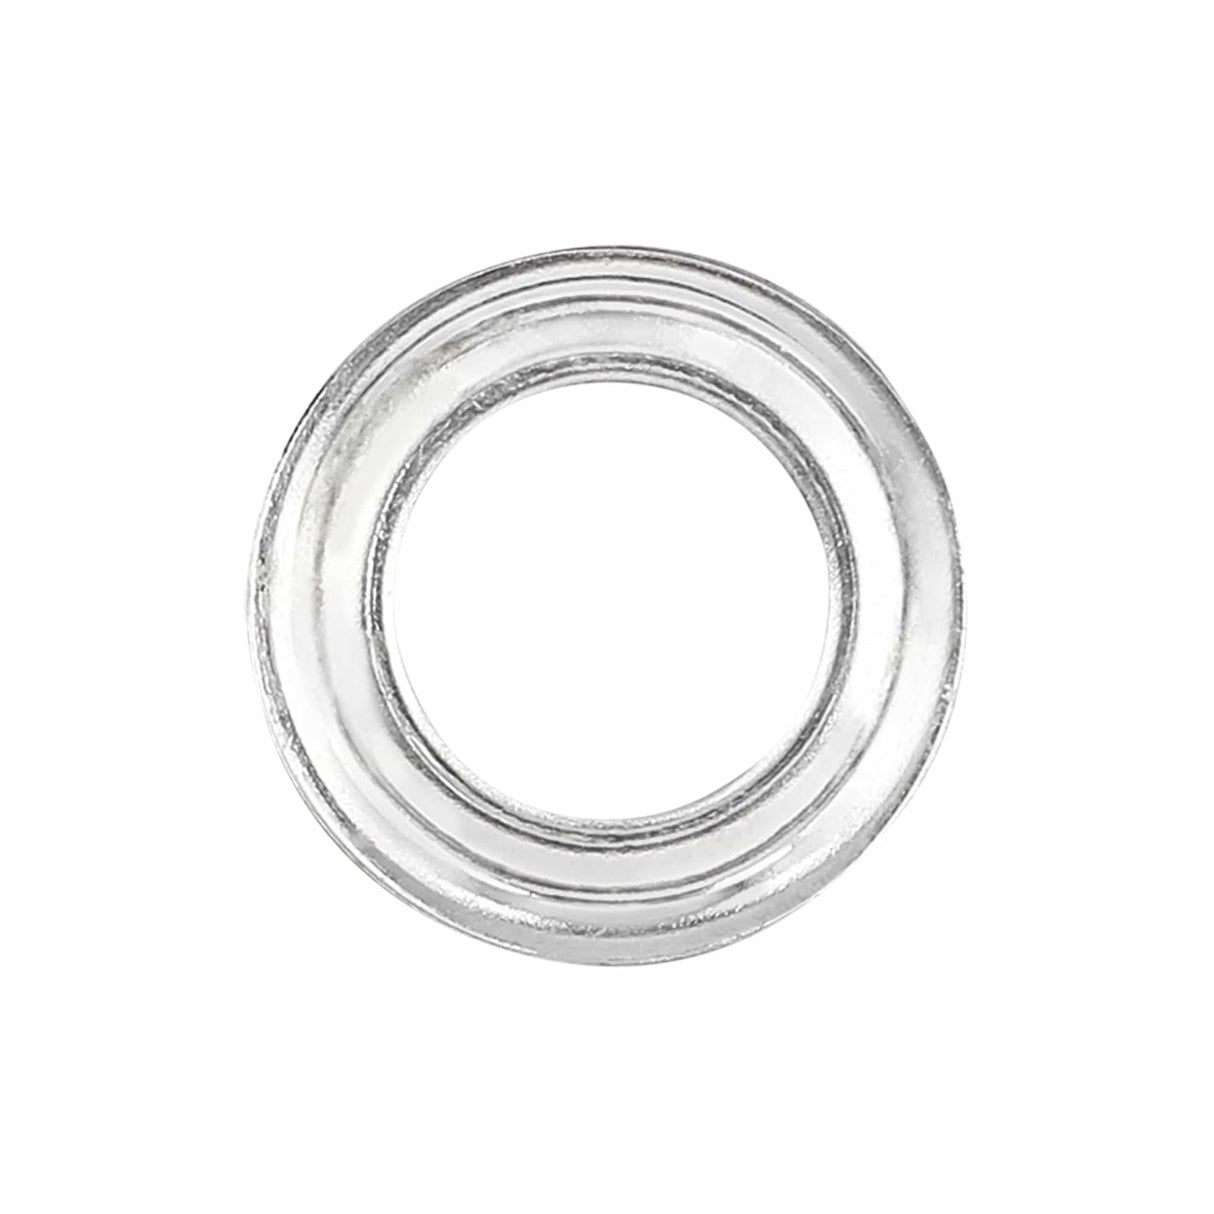 Ohio Travel Bag Fasteners 1/4" Nickel, Washer, Steel - 24 pk, #A-400-NP A-400-NP